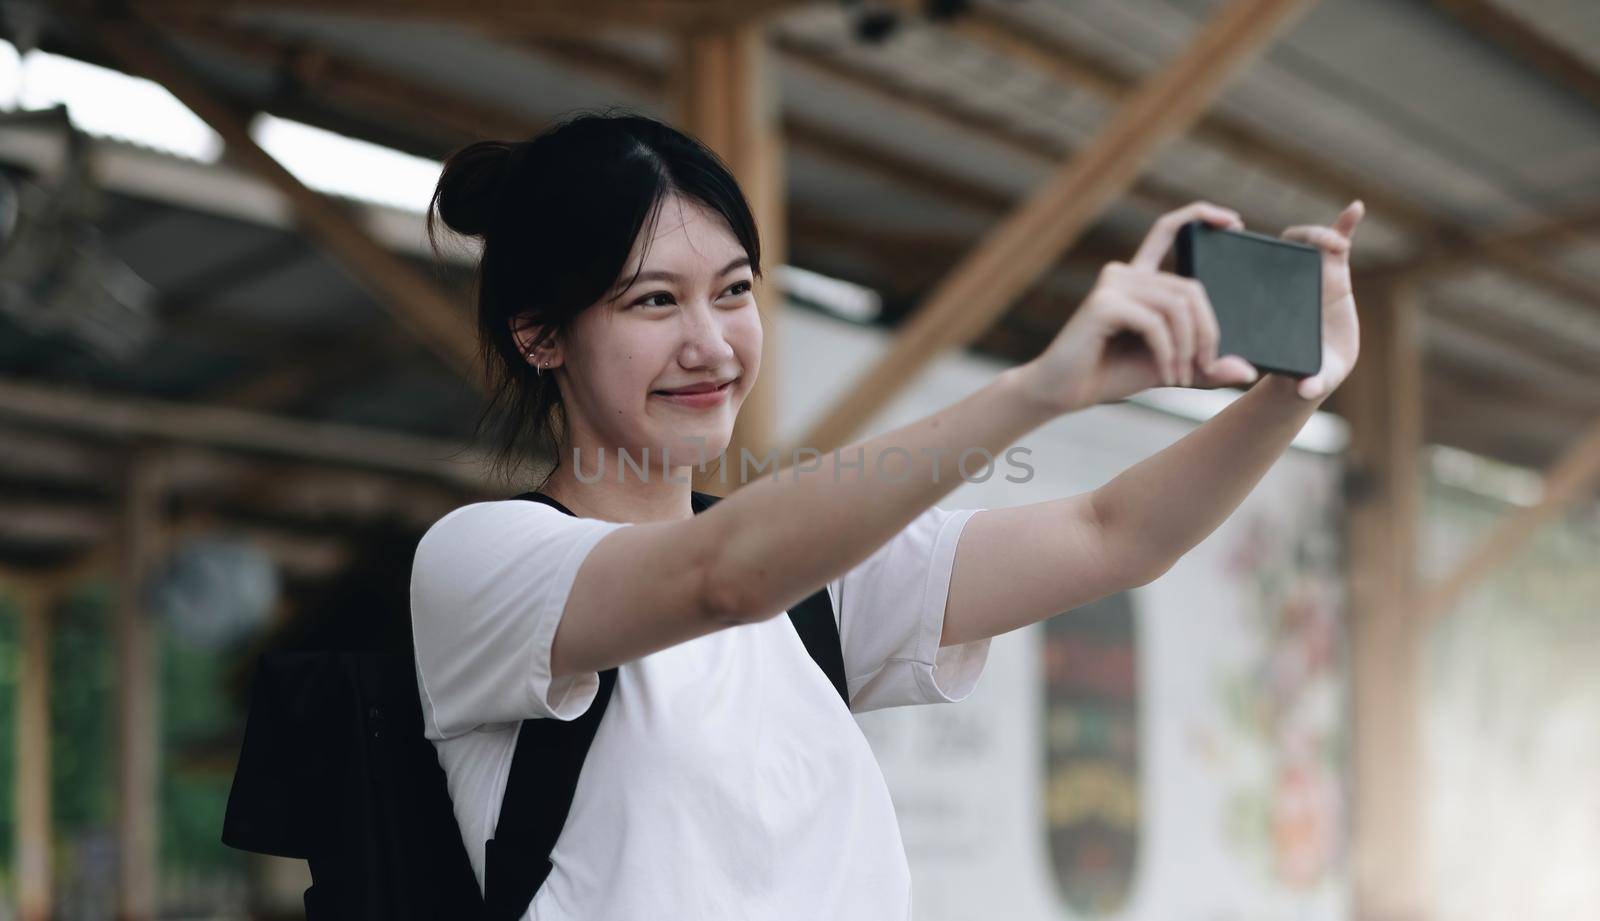 Tourist woman aling selfie with a smartphone while at the train station. Enjoying travel concept. Girl using smartphone while at the railway station platform..